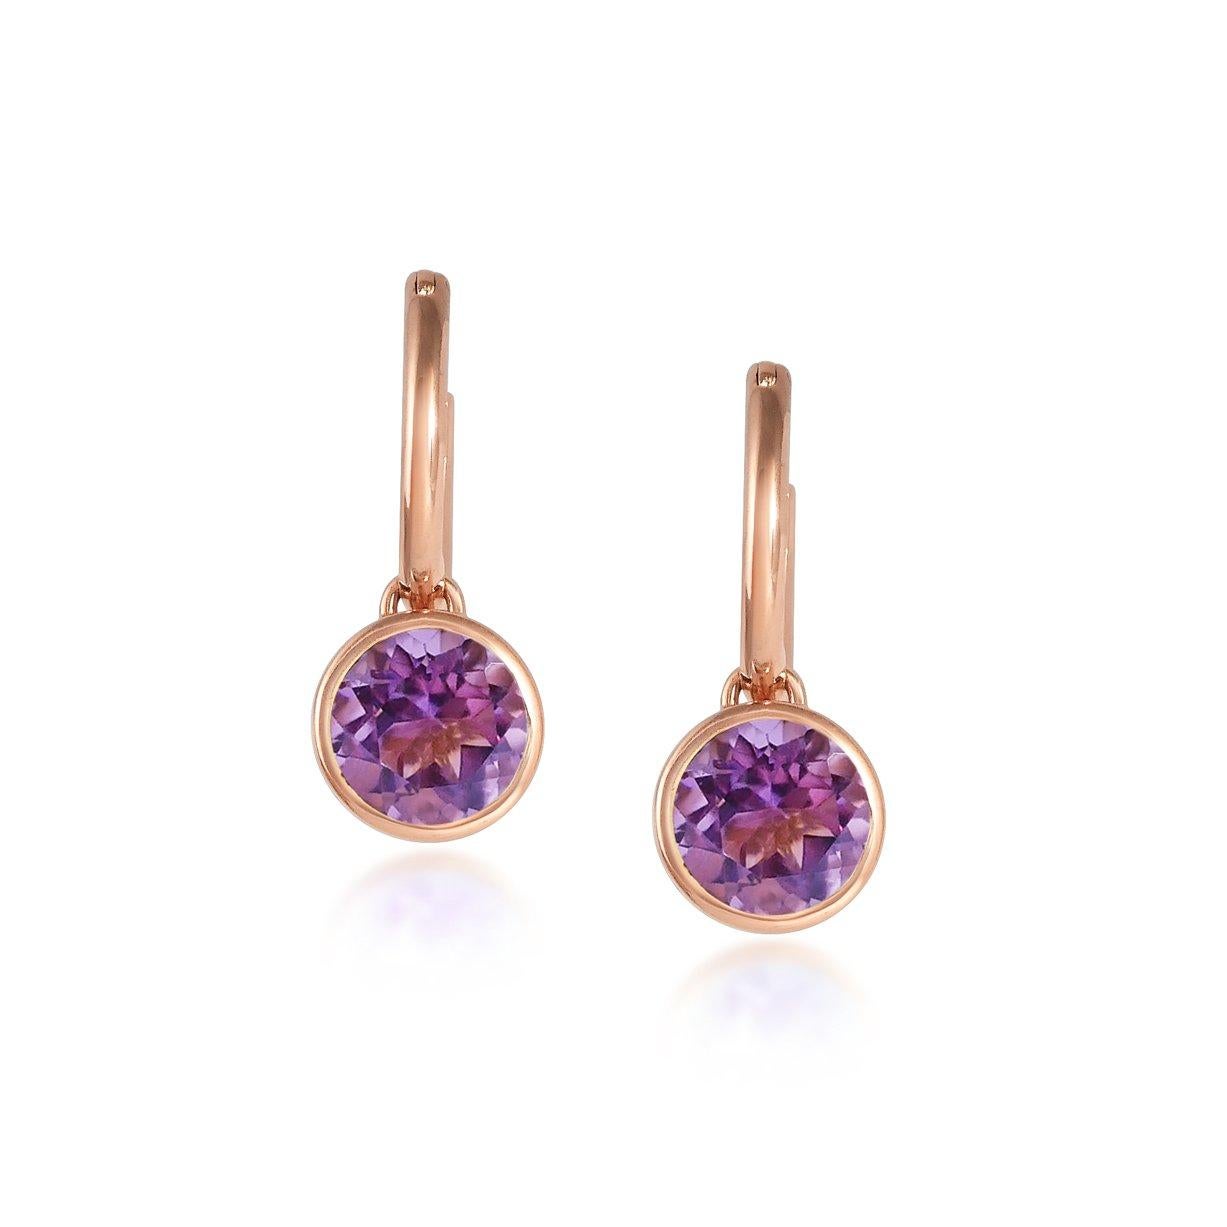 Round Cut Handcrafted 2.40 Carats Amethyst 18 Karat Rose Gold Drop Earrings For Sale